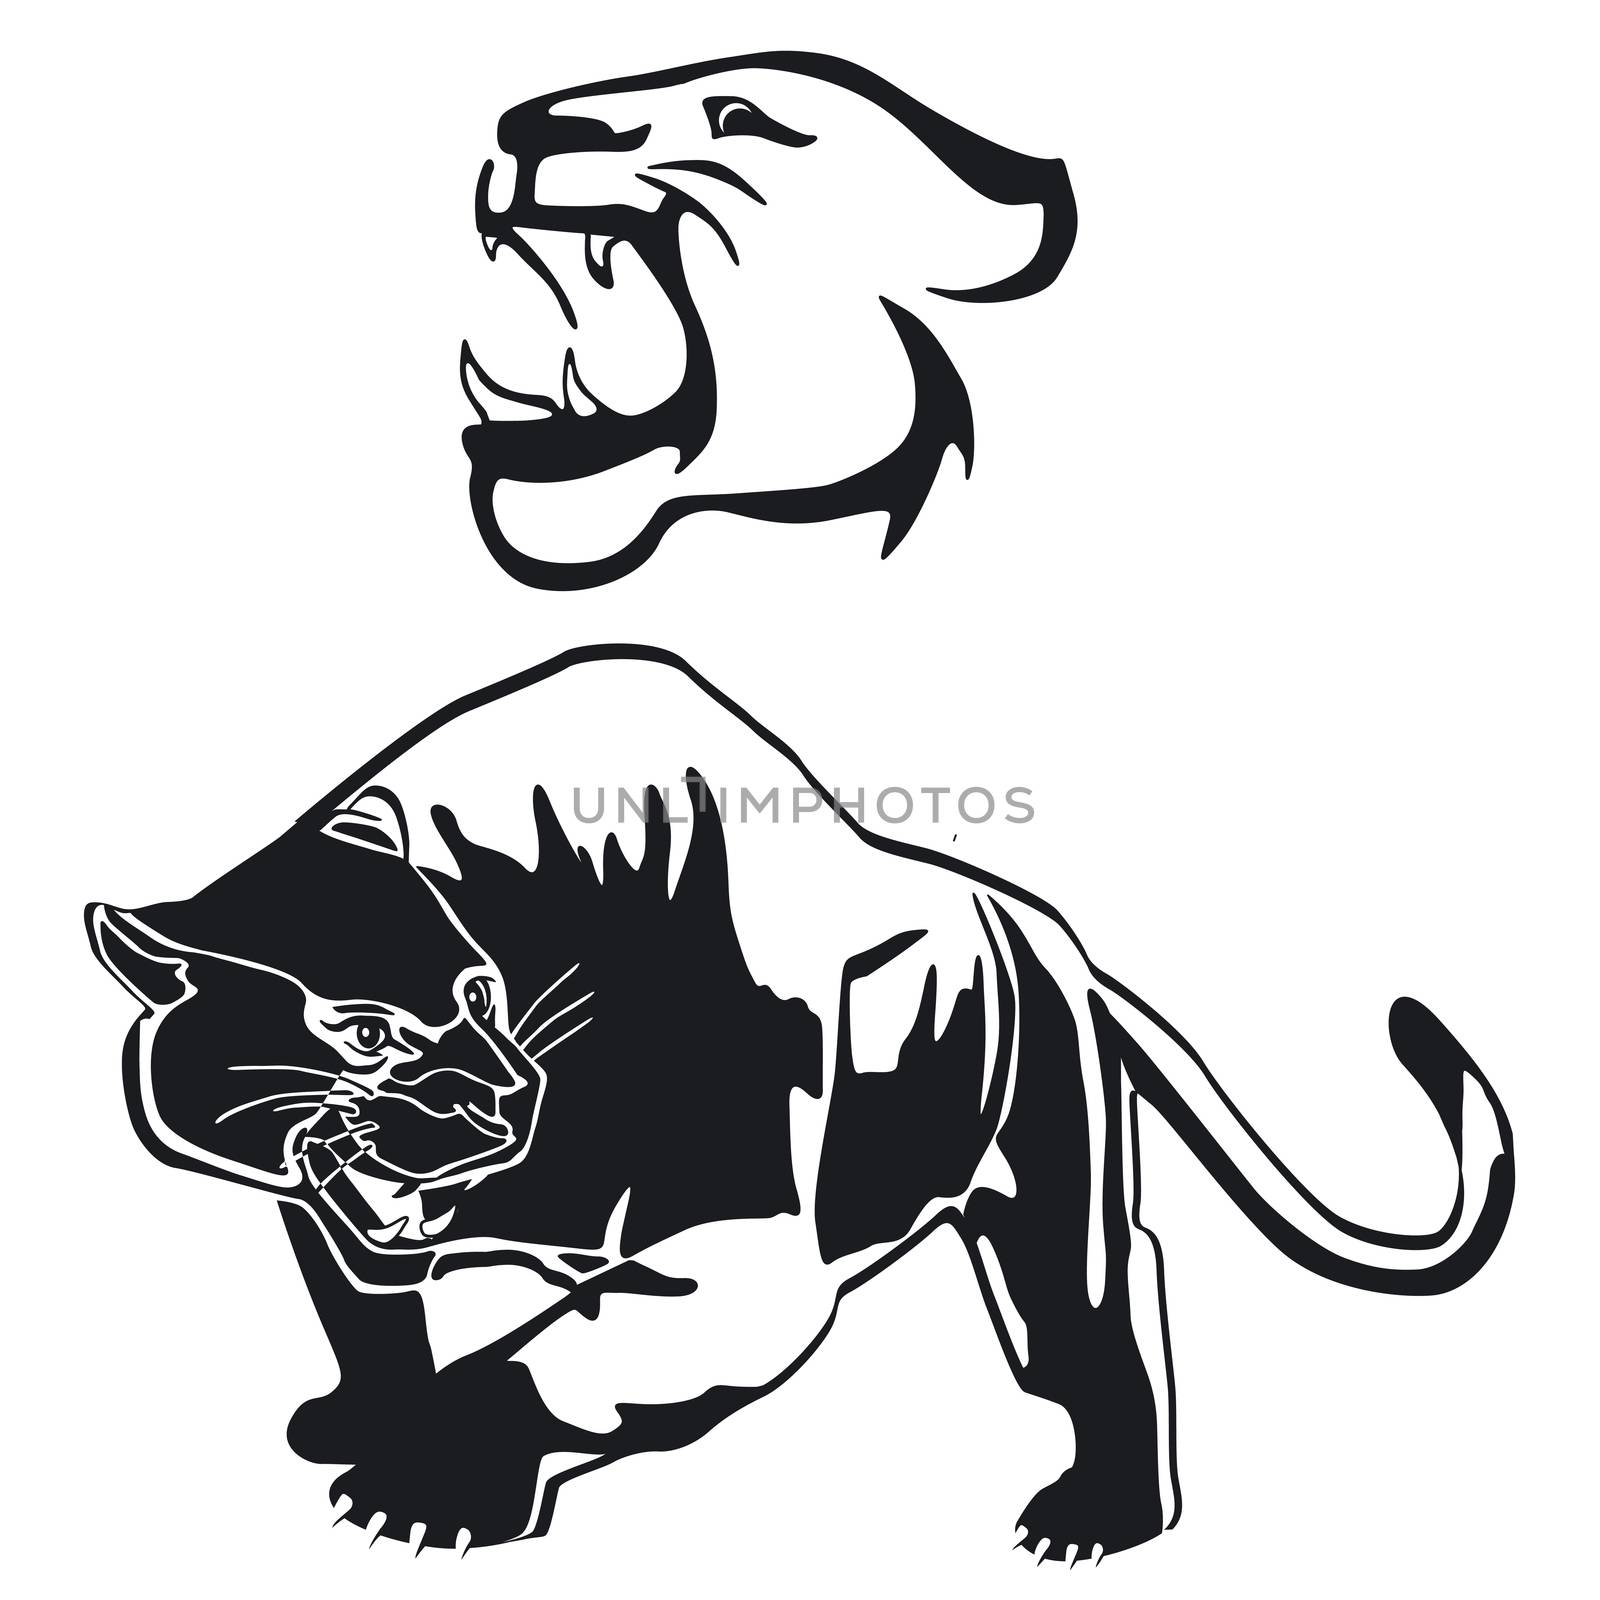 Leopard, panther graphic, illustration by scusi